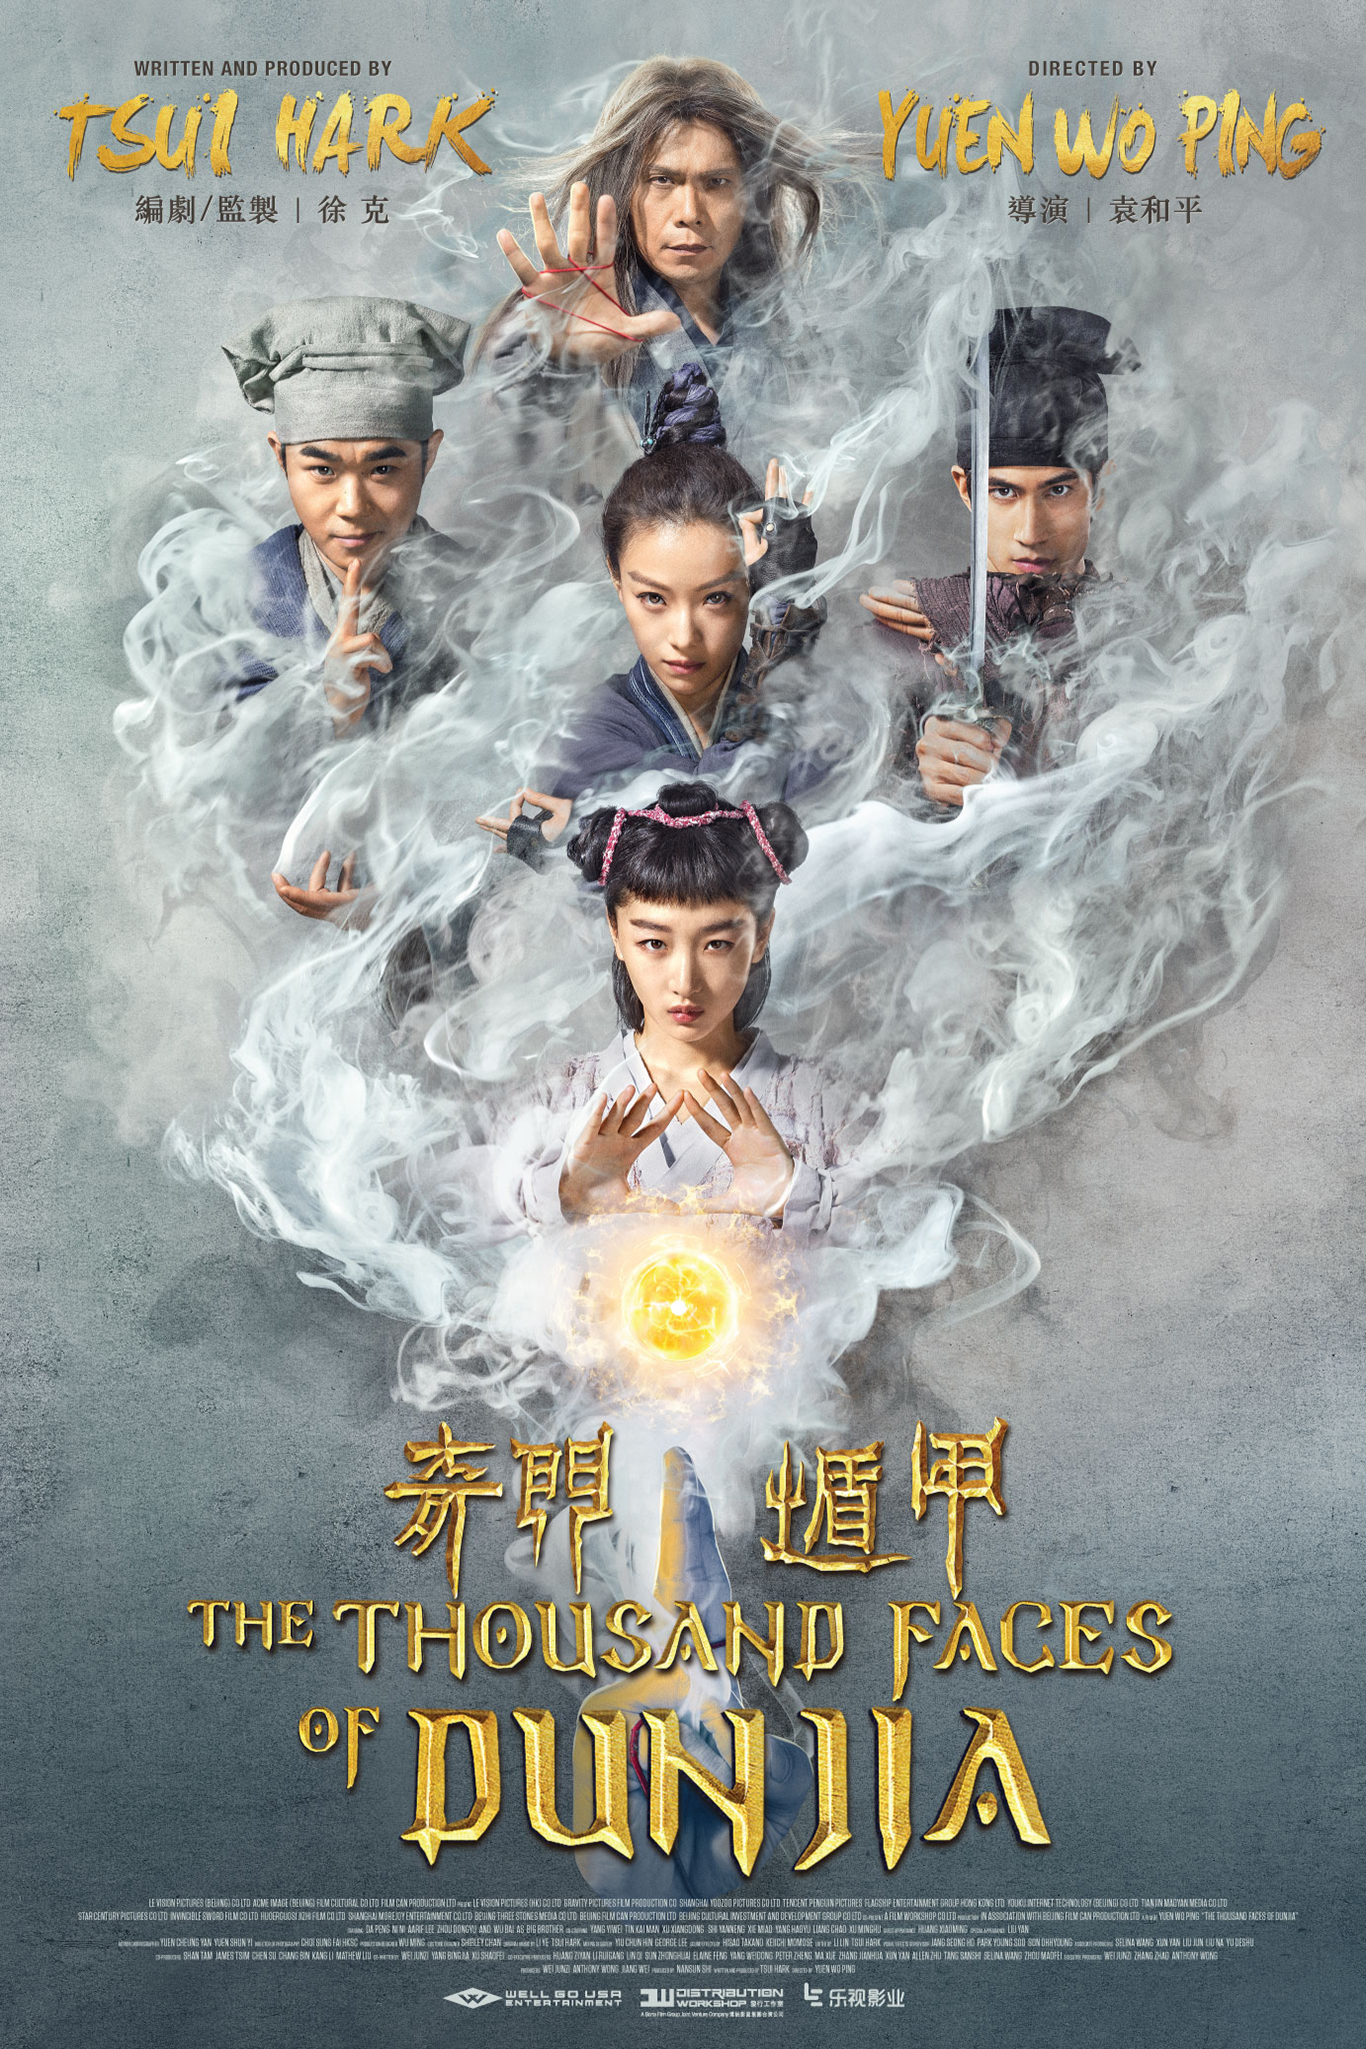 The Thousand Faces of Dunjia (2017) 480p BluRay Hindi ORG Dual Audio Movie ESubs [450MB]